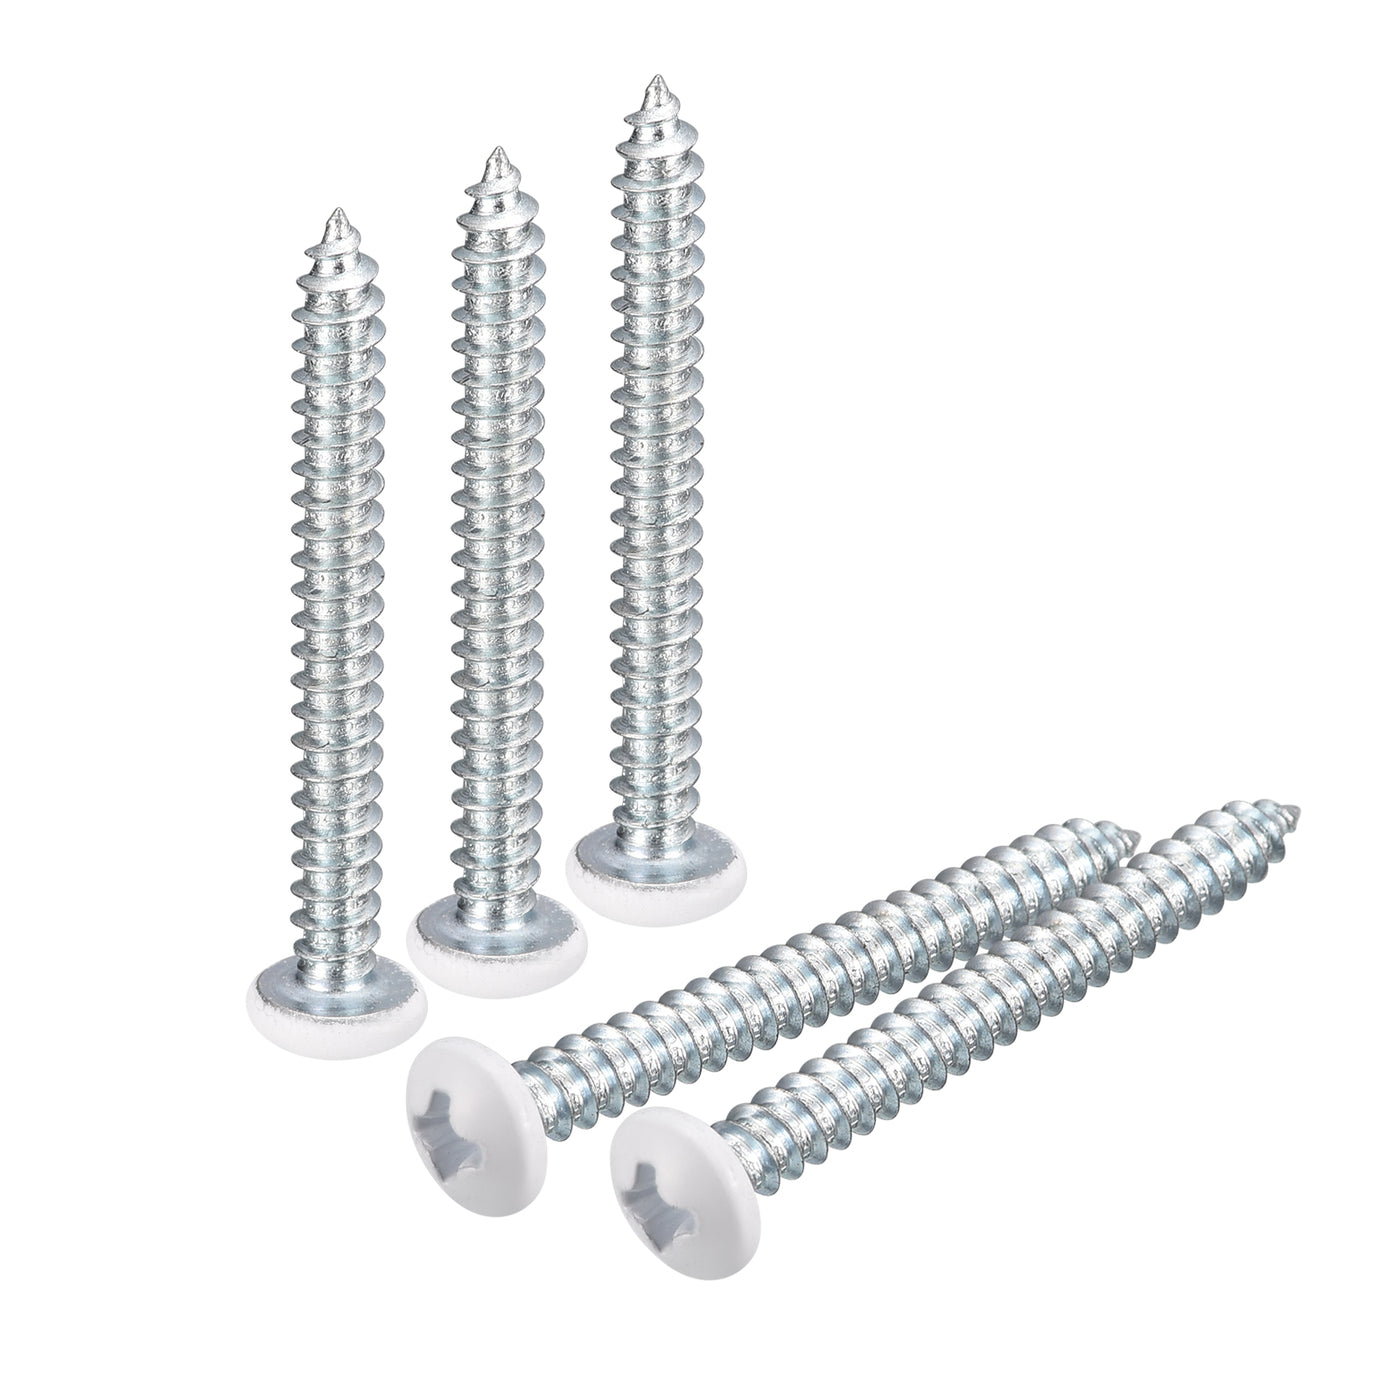 uxcell Uxcell ST4x40mm White Screws Self Tapping Screws, 100pcs Pan Head Phillips Screws